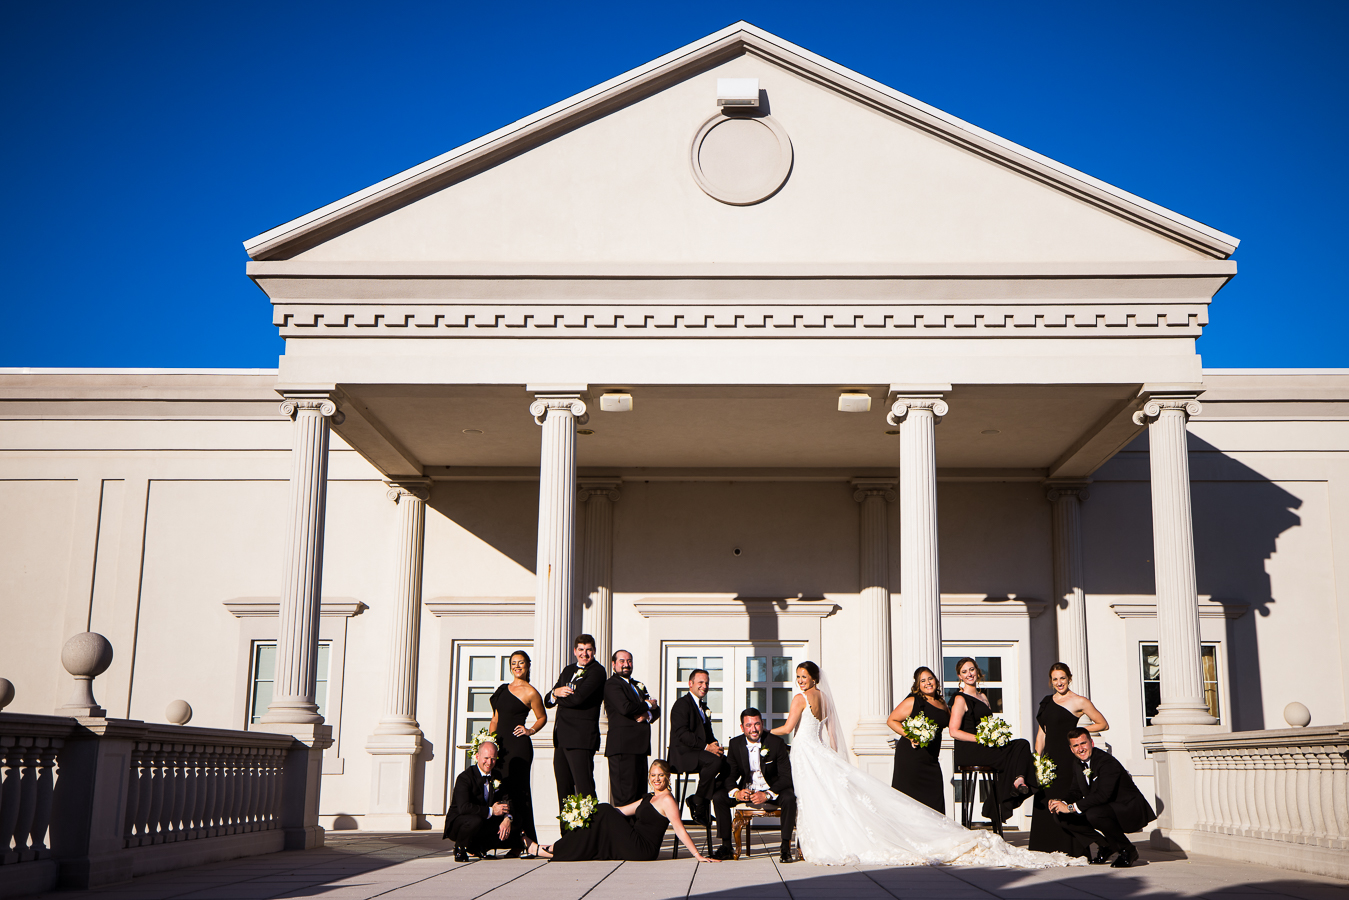 vogue nj wedding photographer, lisa rhinehart, captures this vogue, high end shot of the bride and groom with their black and gold wedding party outside of the palace at somerset park in new jersey 